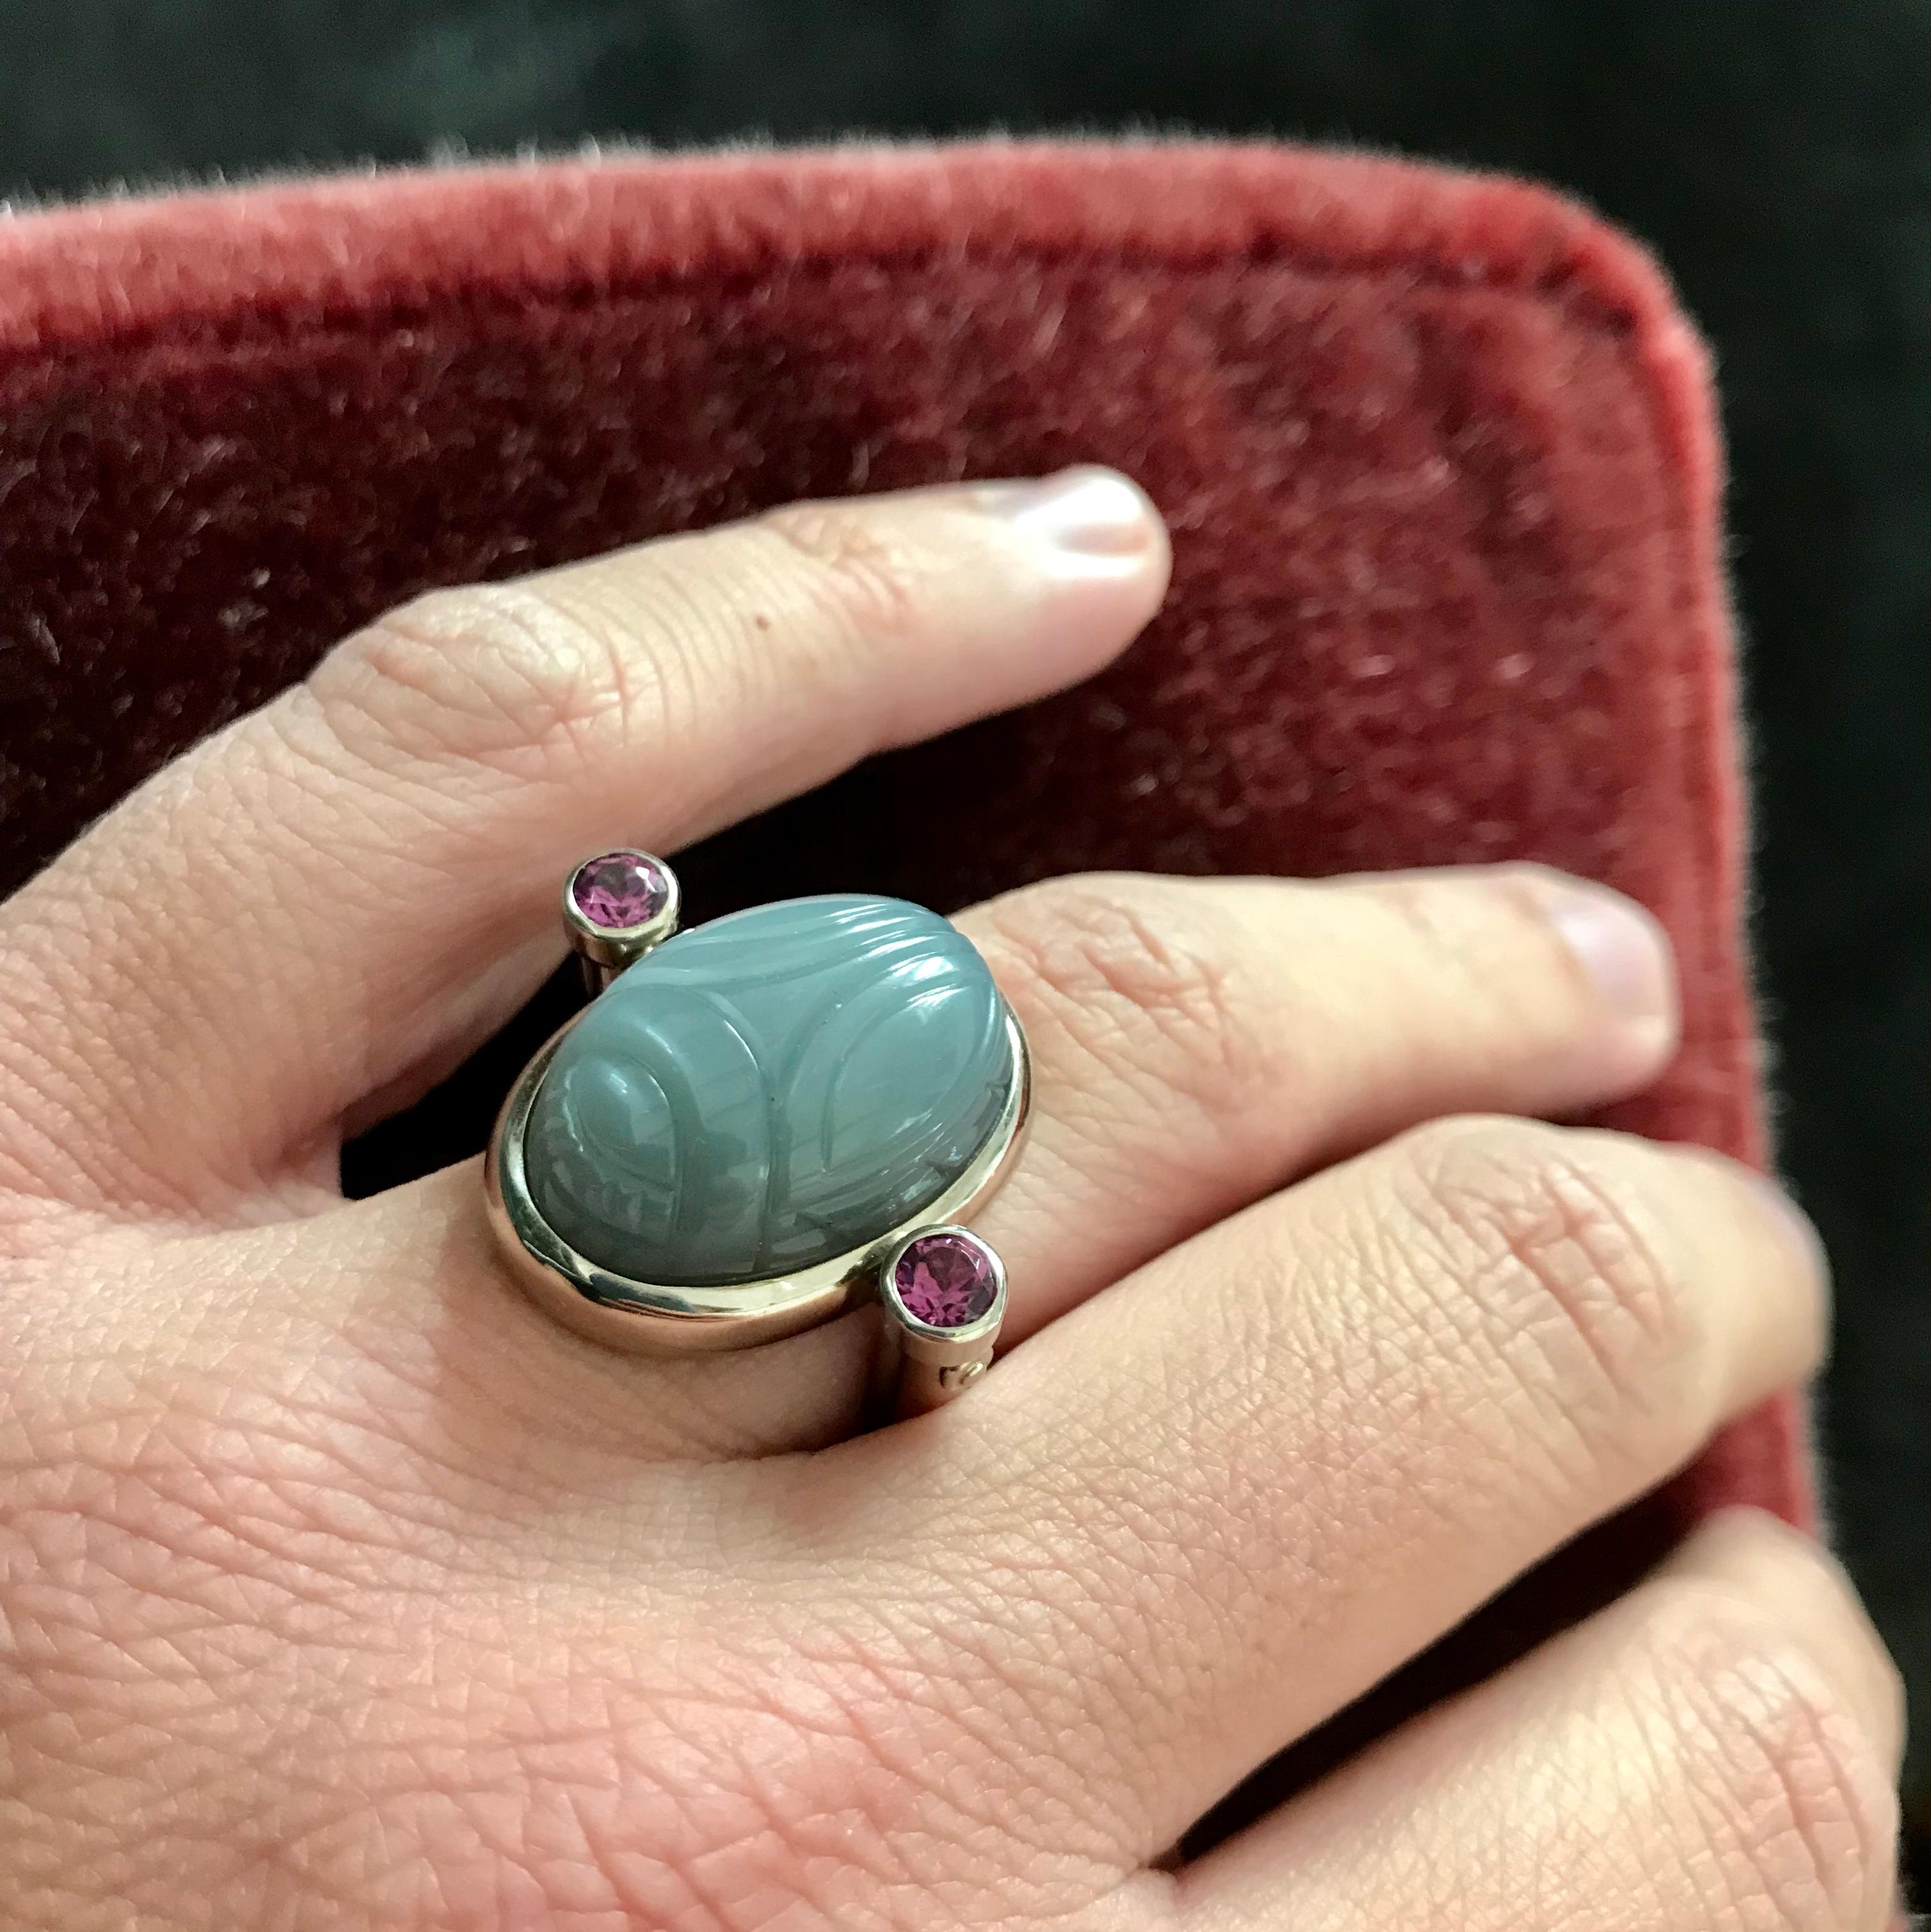 Egyptian Revival Scarab Ring in 18 Carat White Gold, 1 Moonstone 24.17 ct, 2 Rhodolites 0.67 ct For Sale